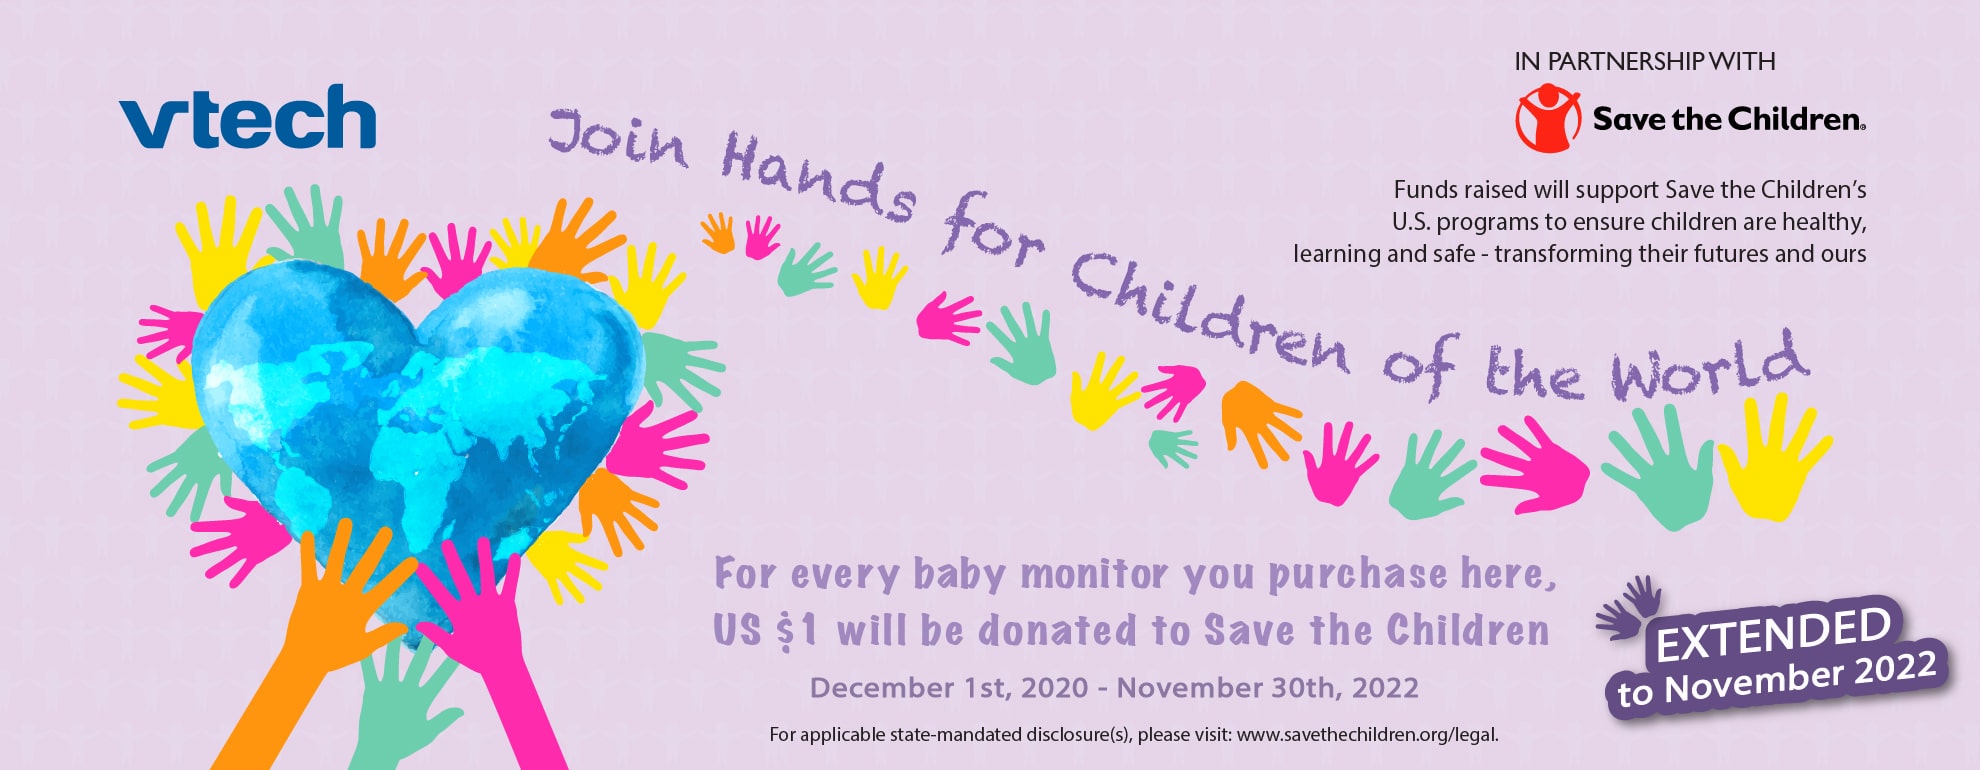 Join Hands for Children of the World - For every baby monitor you purchase, $1 USD will be donated to Save the Children